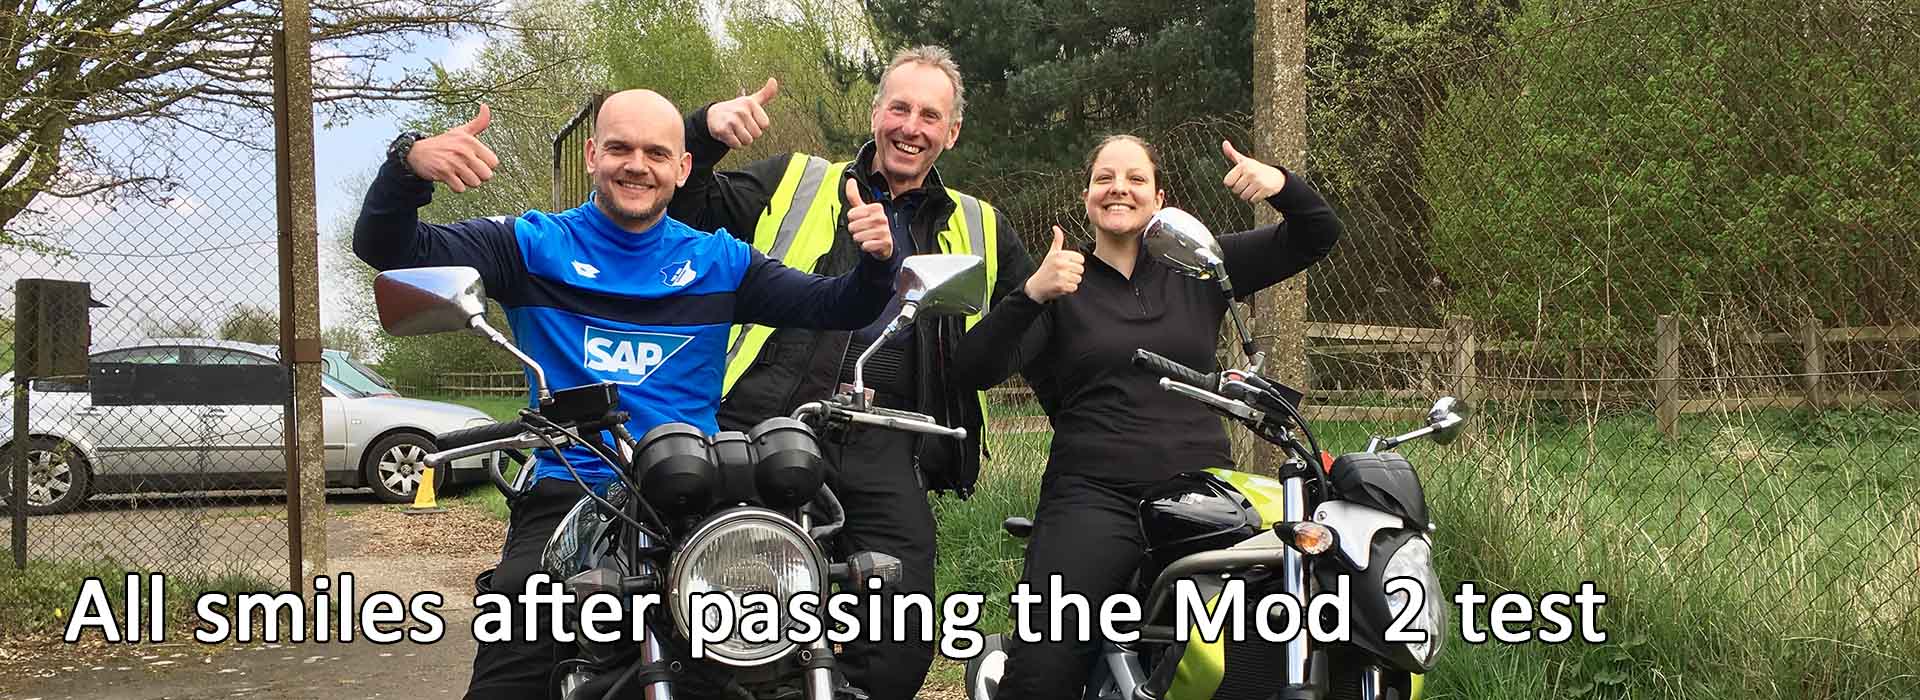 Anglia Training Services - CBT & Motorcycle Training in Norfolk